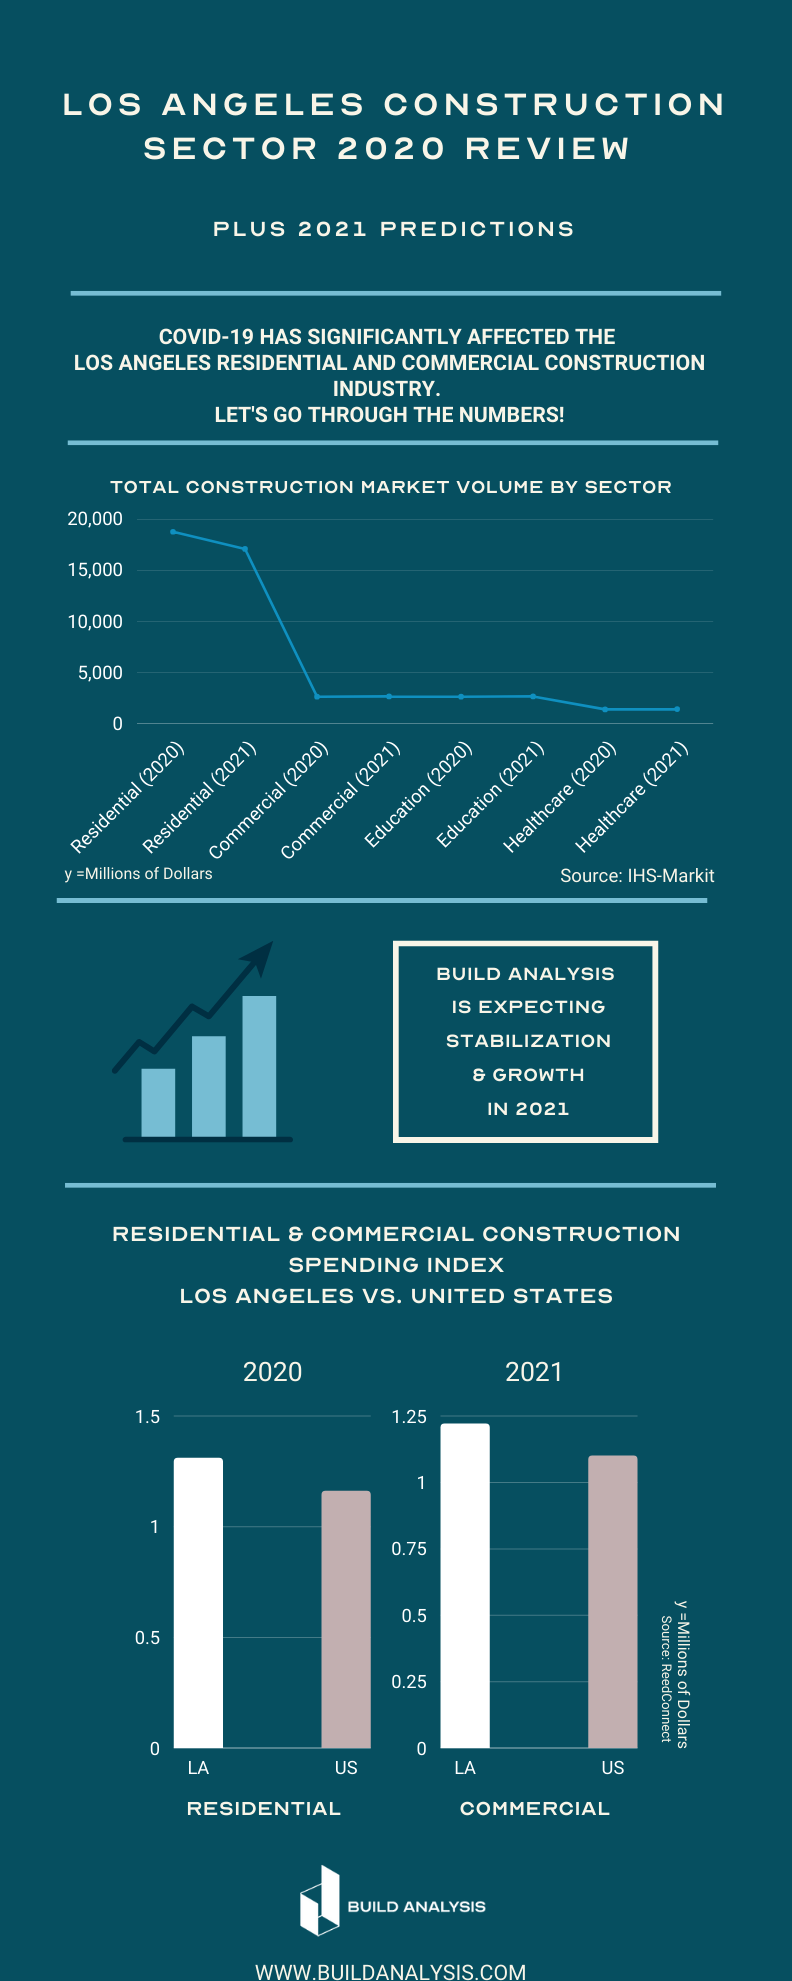 Los Angeles Construction Sector 2020 Review Plus 2021 Predictions